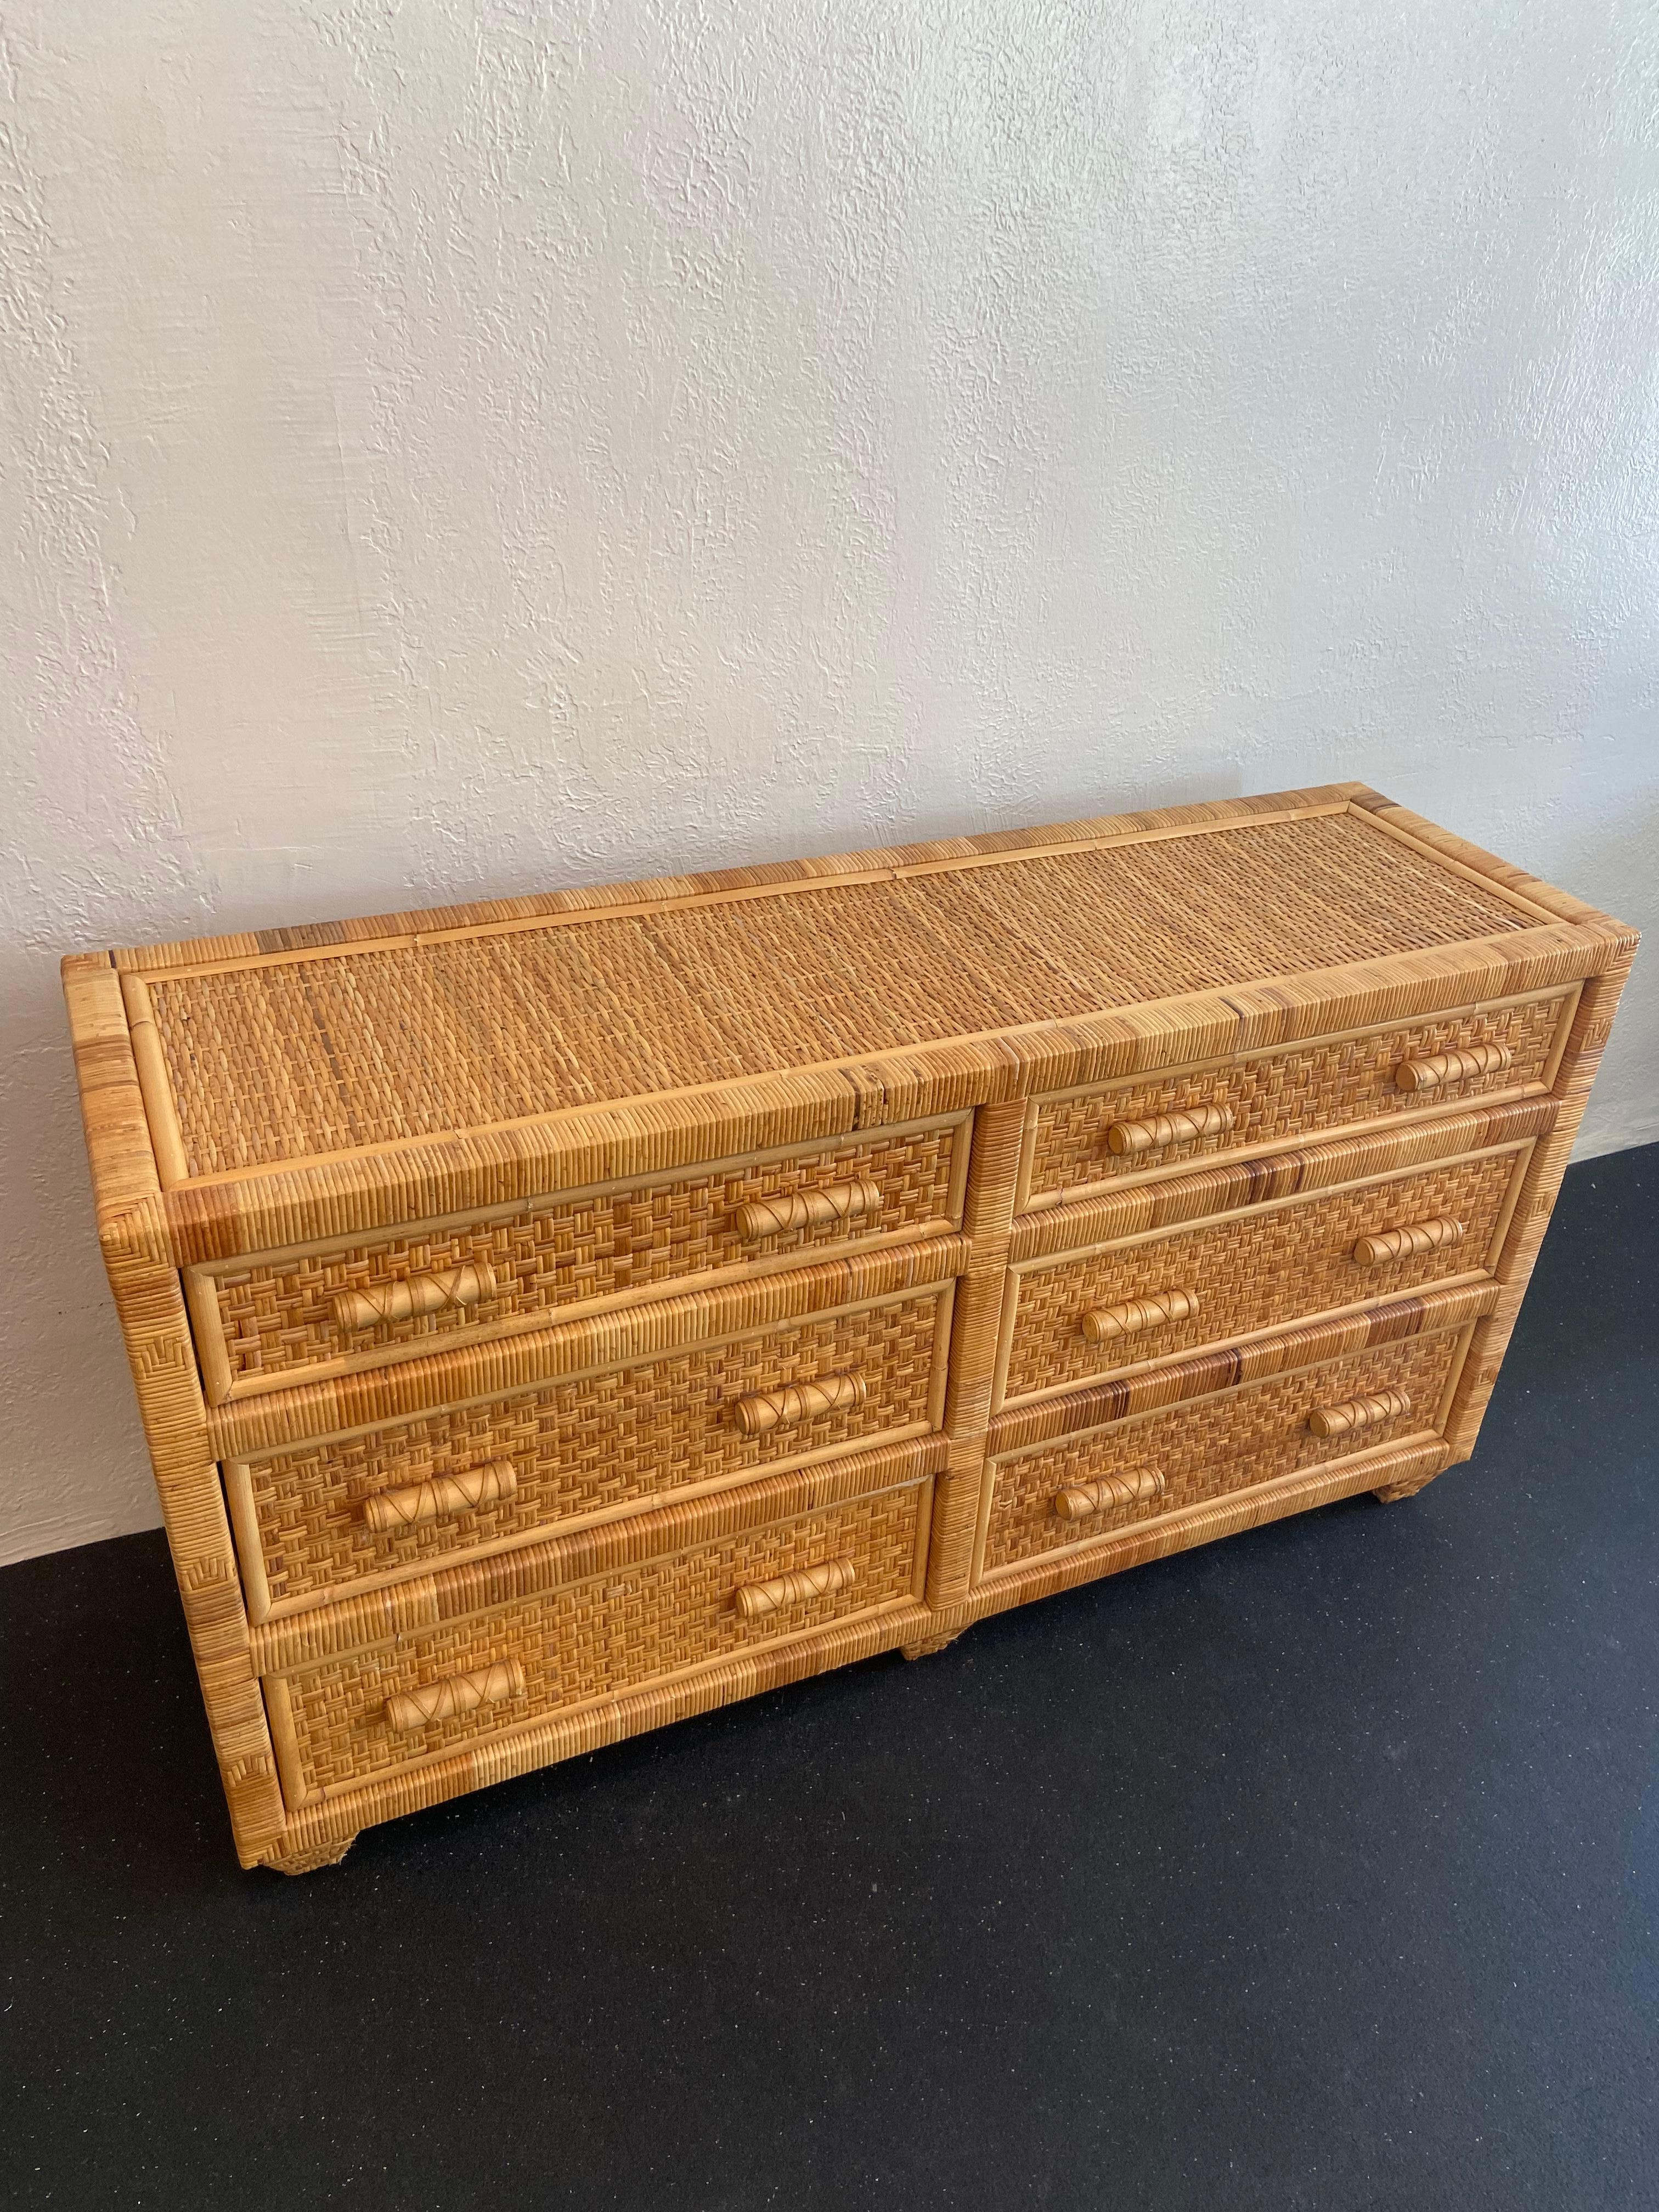 Danny Ho Fong style cane and leather wrapped dresser. Intricately woven cane reminiscent of Fong’s designs complimented with heavy leather wrapped pulls. 

Would work well in a variety of interiors such as modern, mid century modern, Hollywood